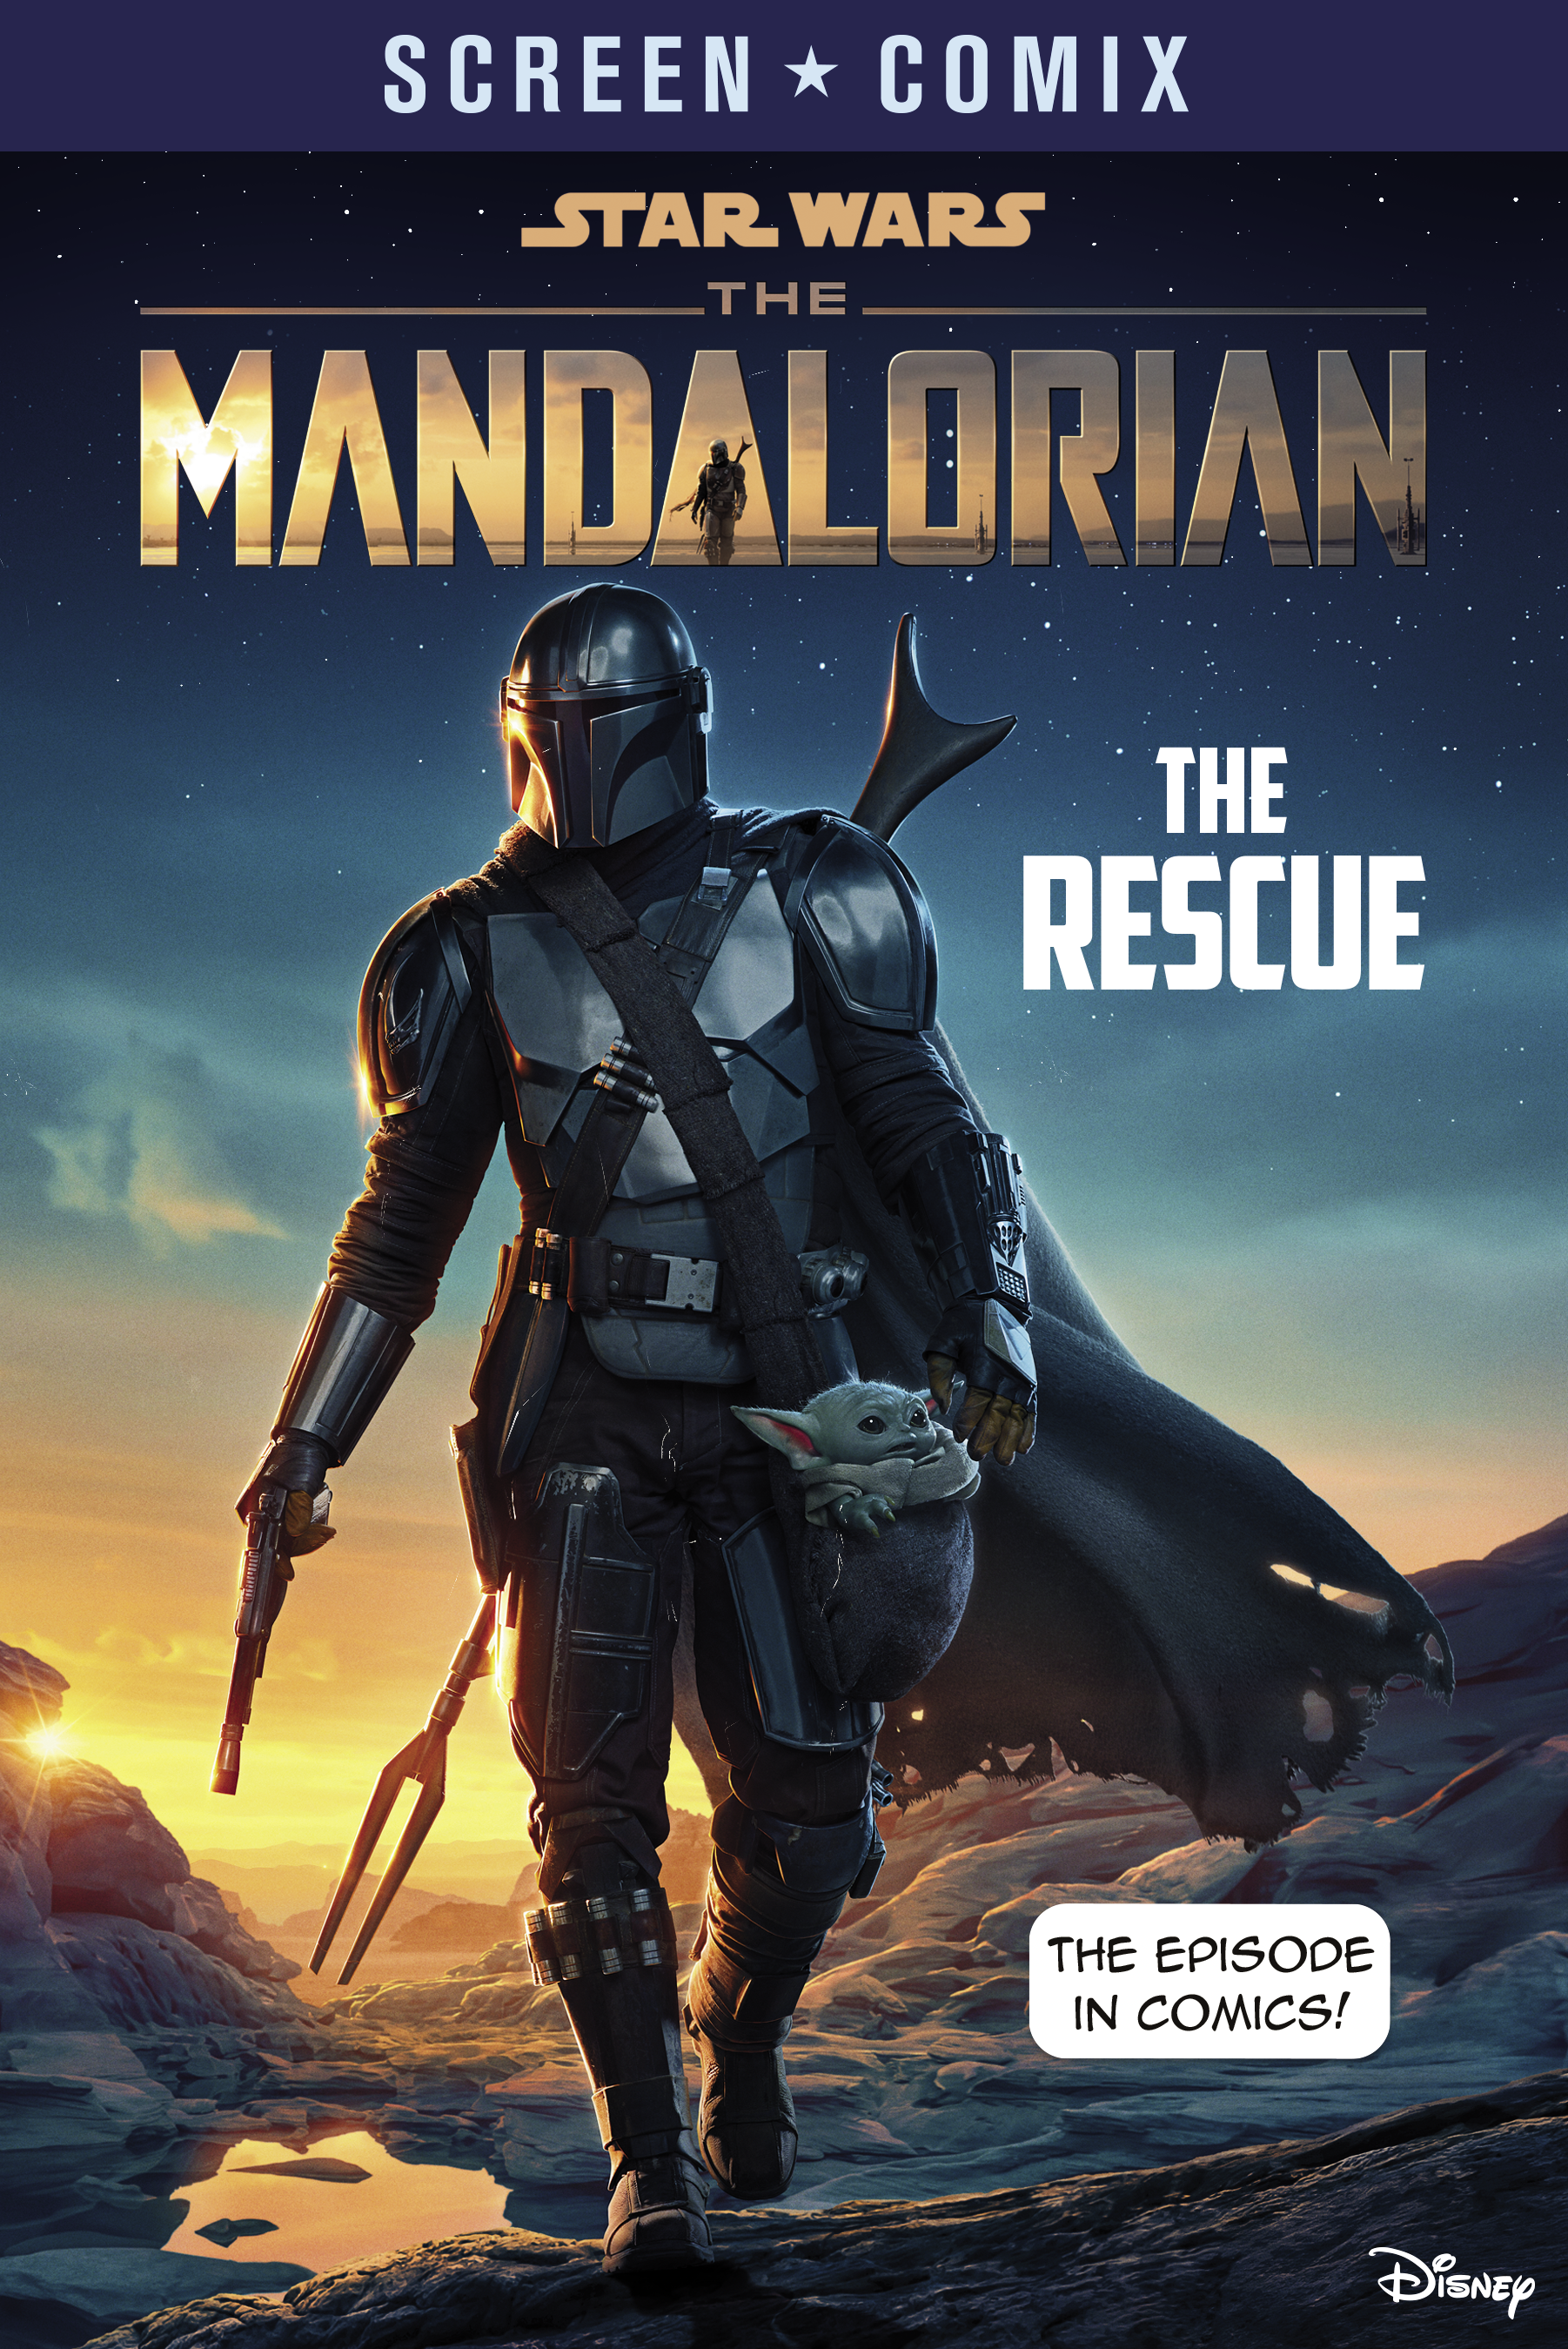 https://static.wikia.nocookie.net/starwars/images/3/35/The_Mandalorian_The_Rescue_cover.png/revision/latest?cb=20211121024027